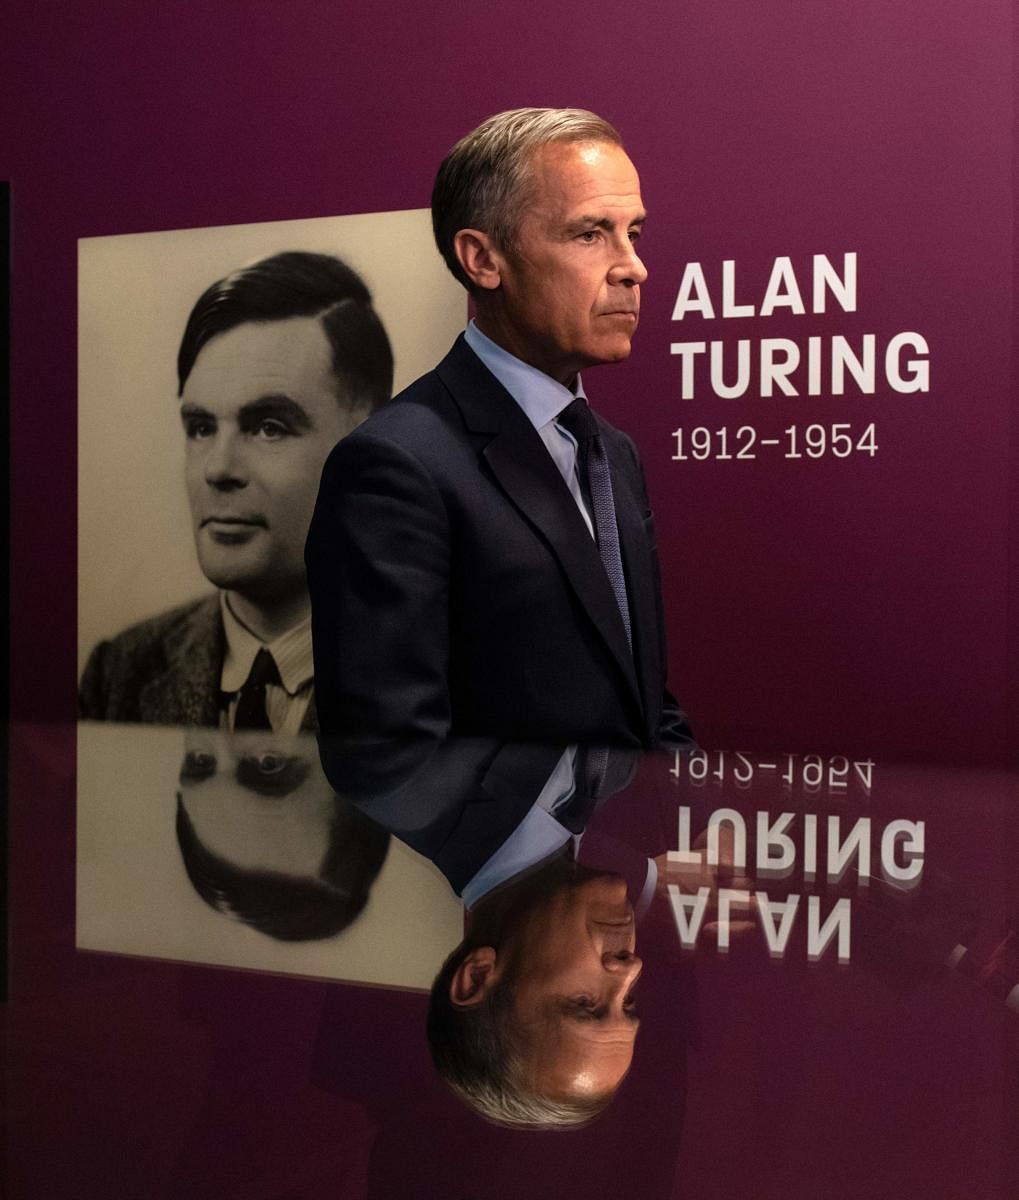 Mark Carney, governor of the Bank of England, is interviewed after attending at a press conference announcing the concept design for the new Bank of England fifty pound banknote, featuring mathematician and scientist Alan Turing, during the presentation a